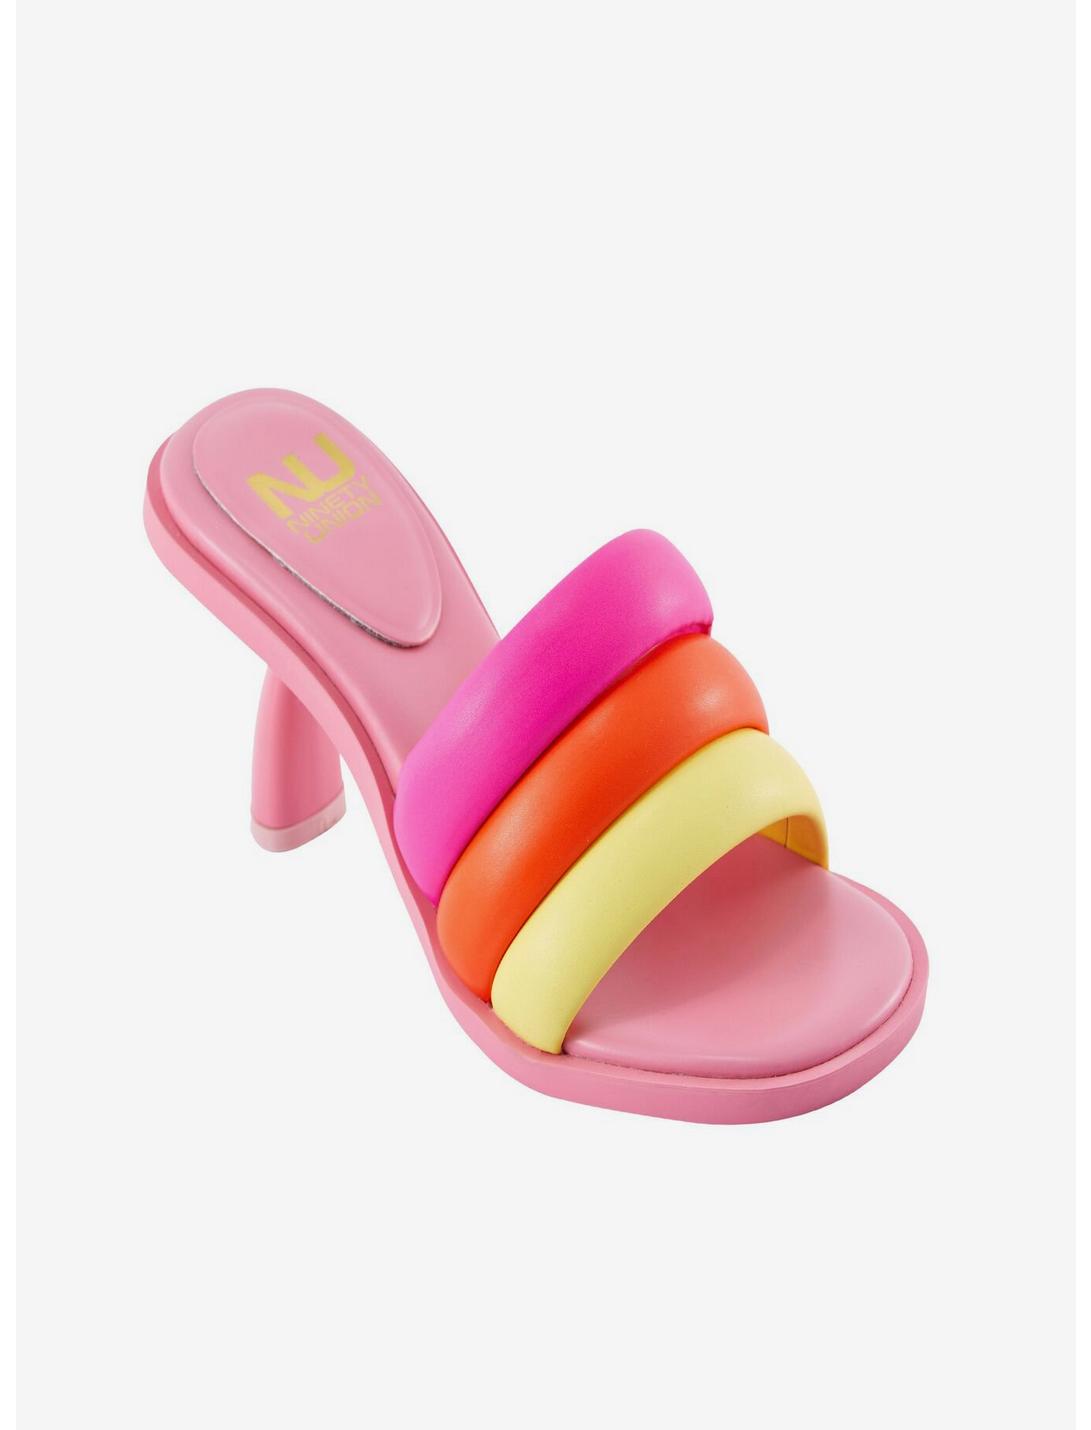 Candy Multicolor Pink Slide, BRIGHT FUSCHIA PINK, hi-res